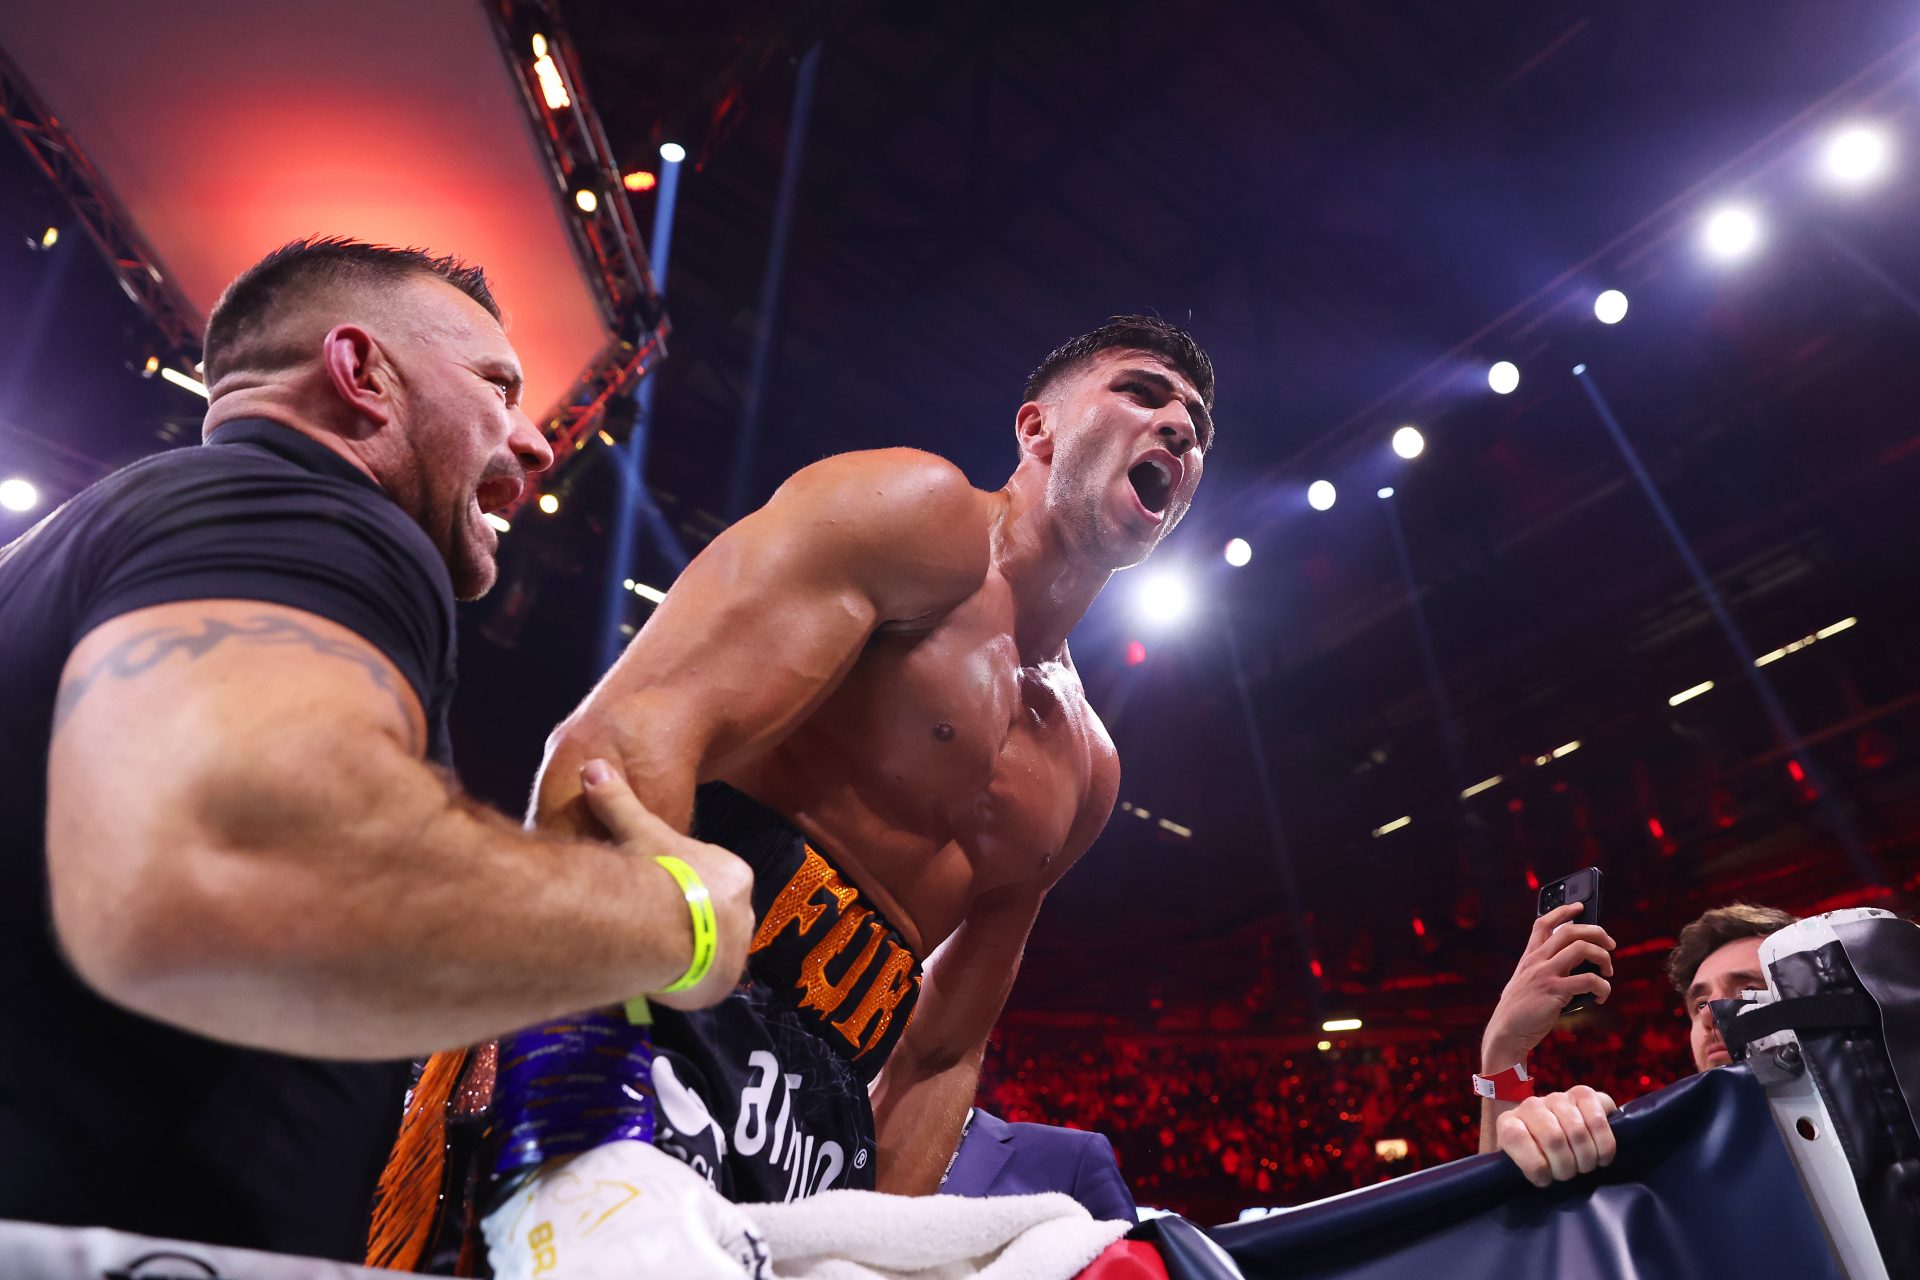 Logan Paul and Tommy Fury claim easy wins, so what's next for crossover boxing?